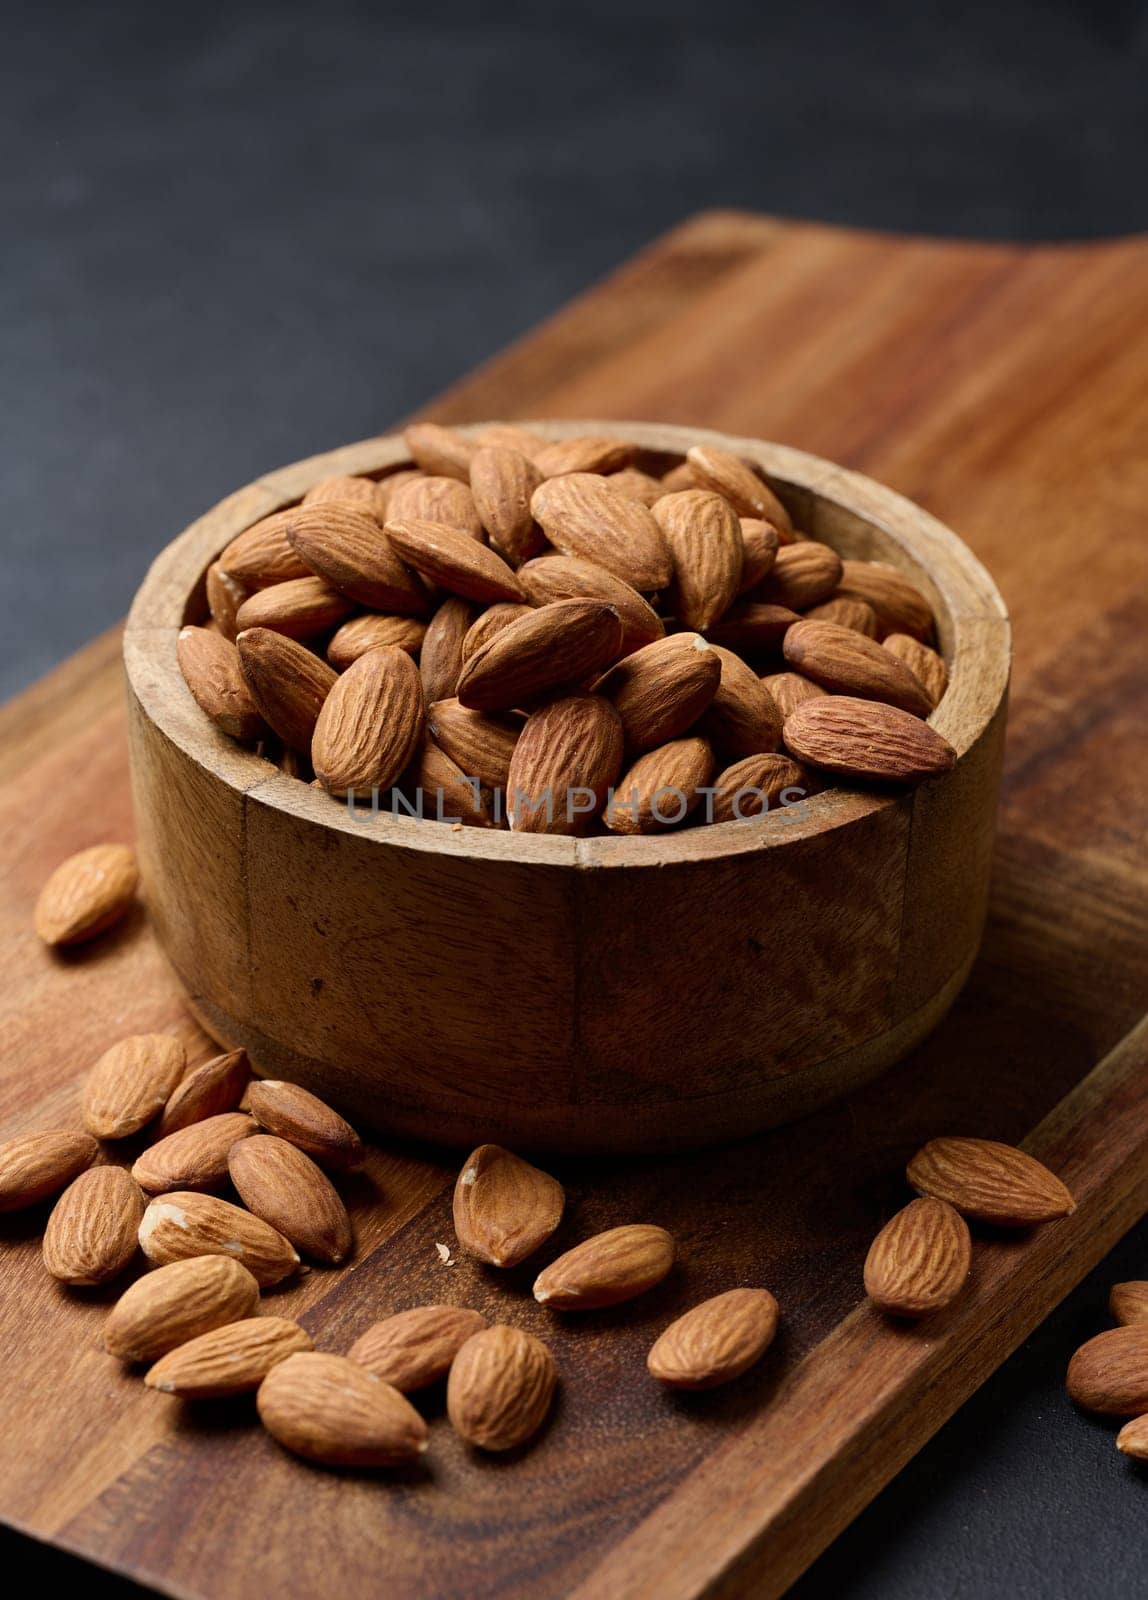 Peeled almond kernels in a round wooden plate on the table